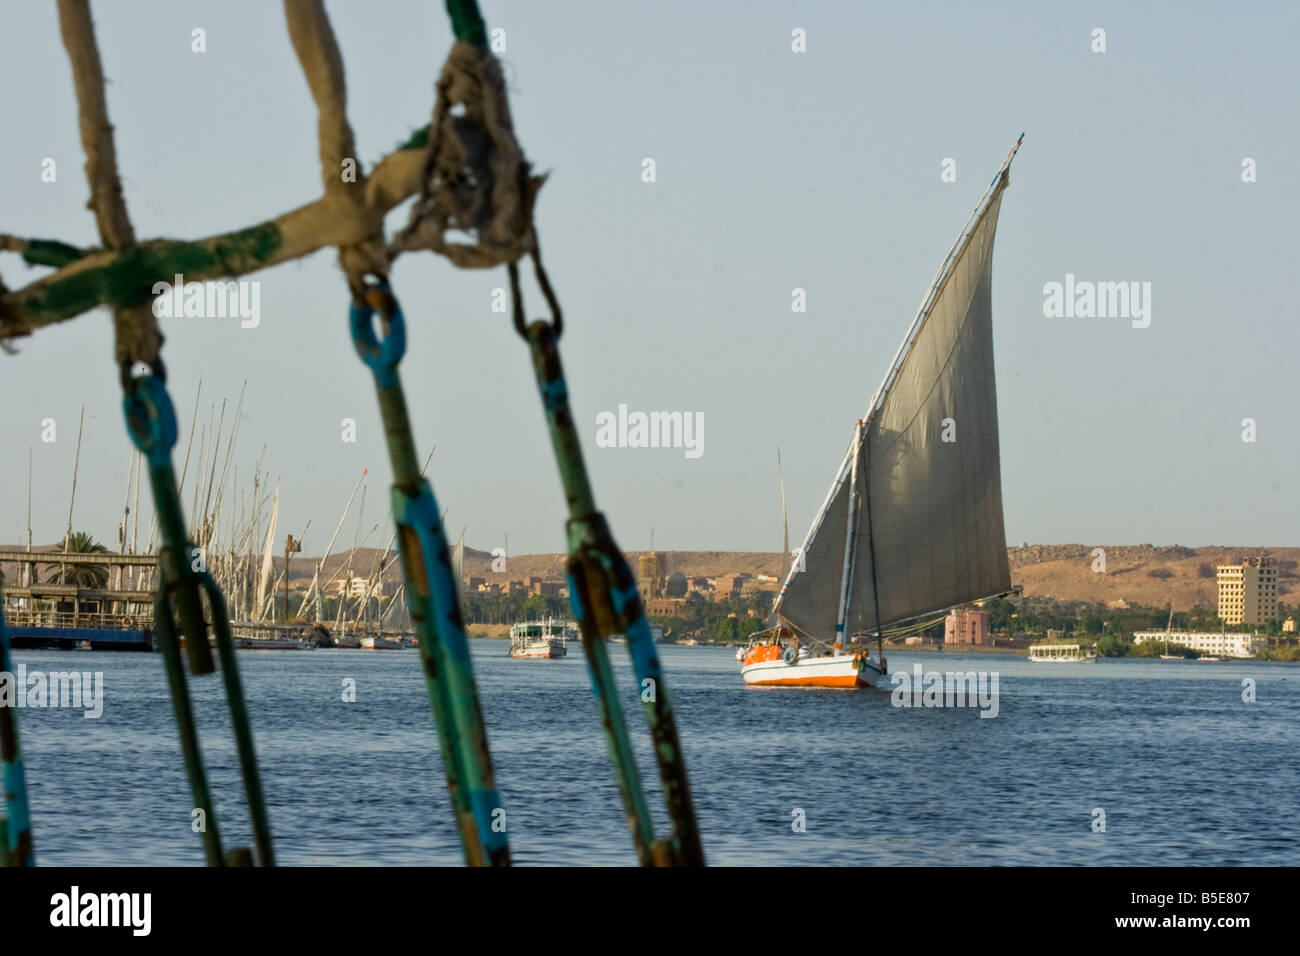 Felucca Sailboats on the Nile River in Aswan Egypt Stock Photo